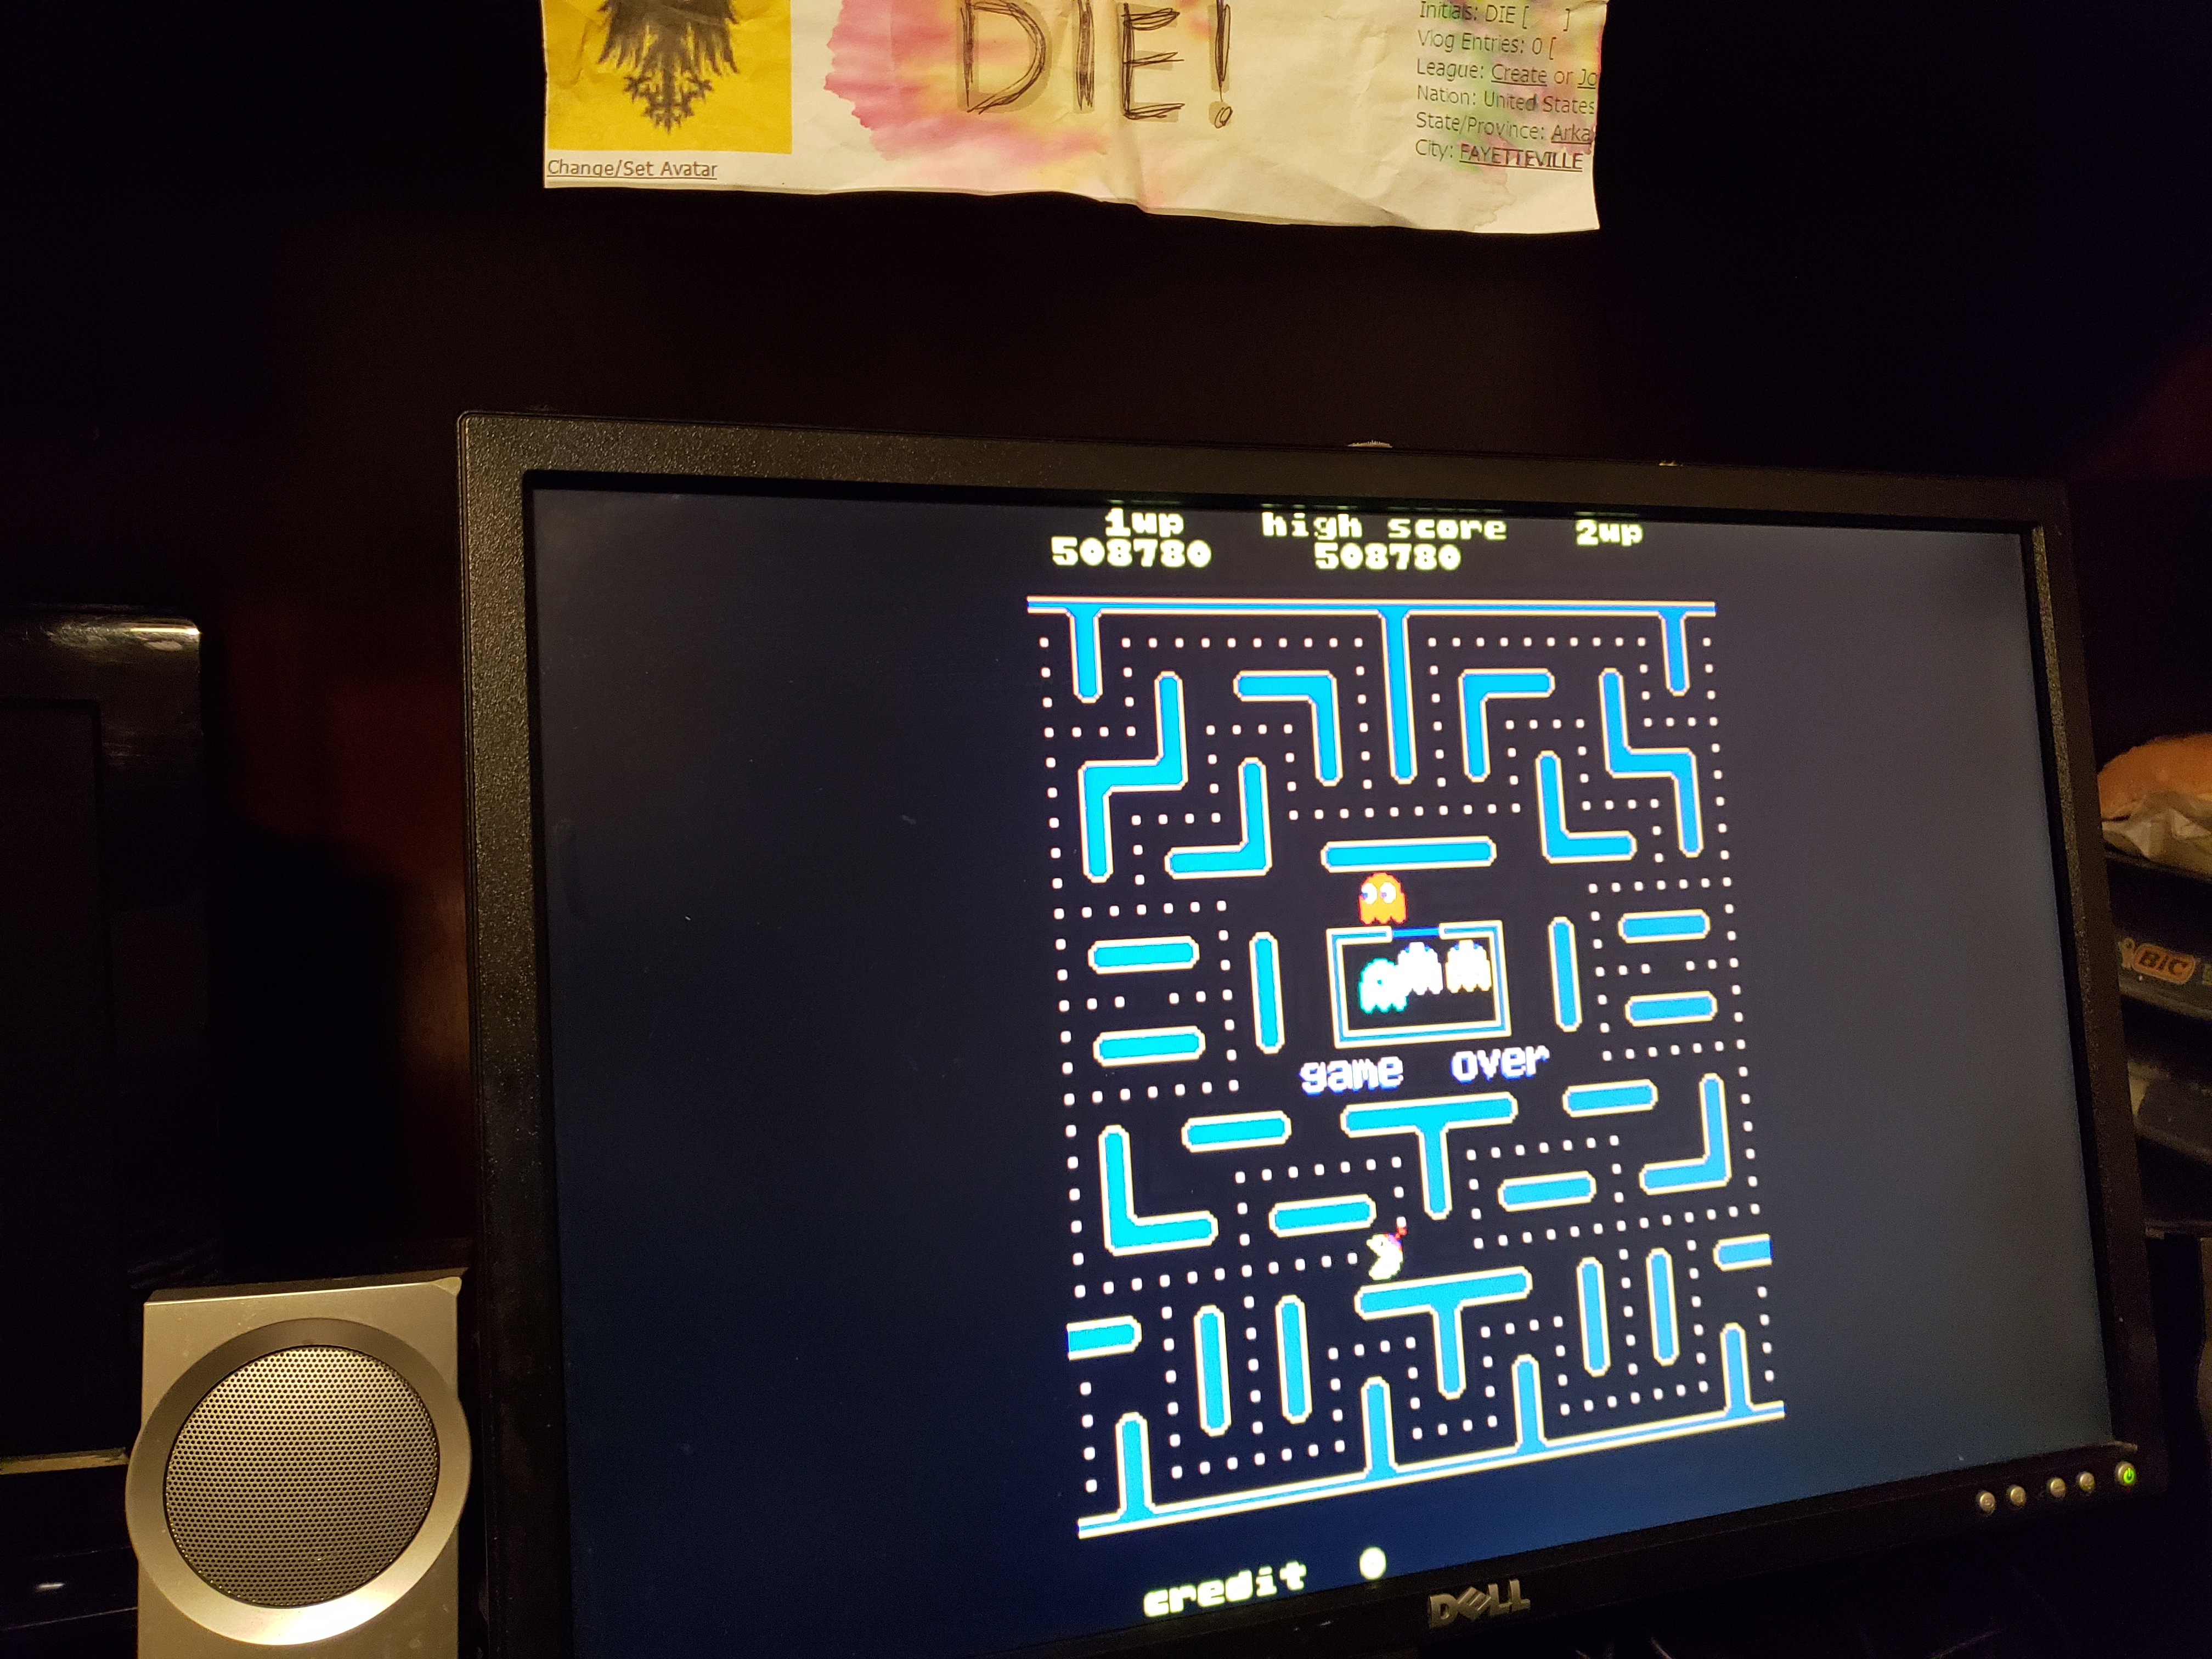 MikeDietrich: Jr. Pac-Man Turbo (Arcade Emulated / M.A.M.E.) 508,780 points on 2018-09-04 11:20:03